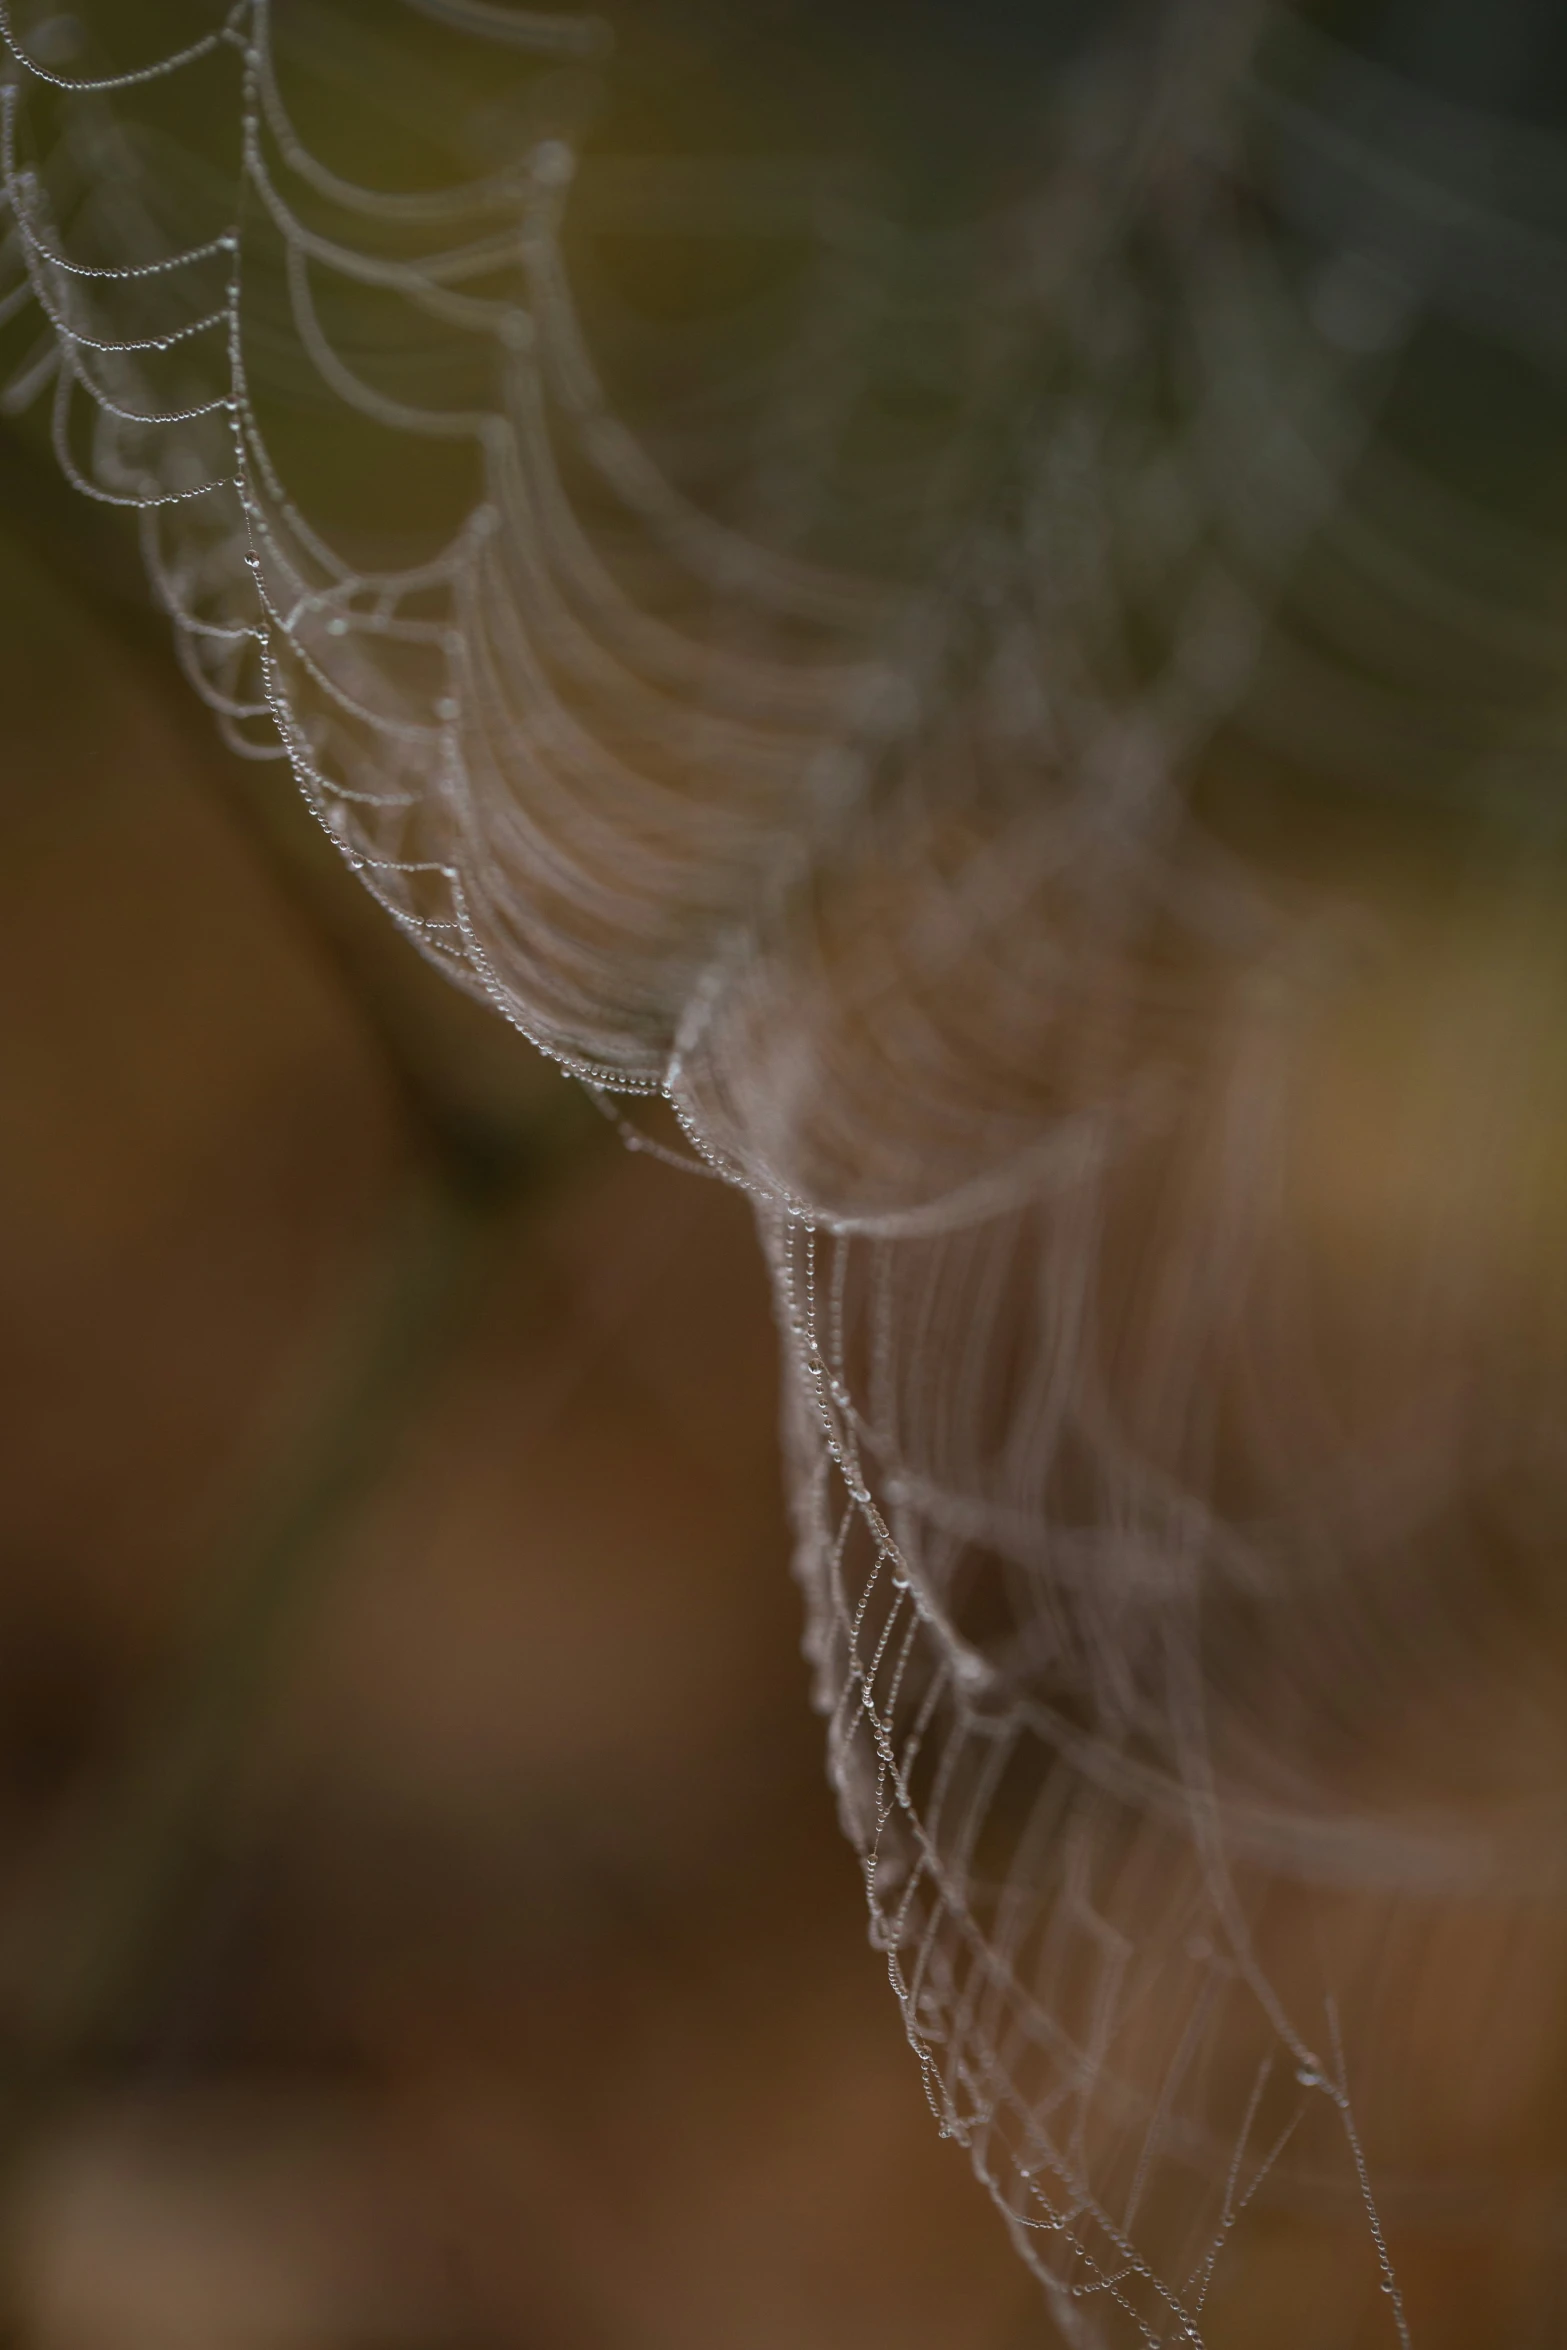 the spider web has water drops on it